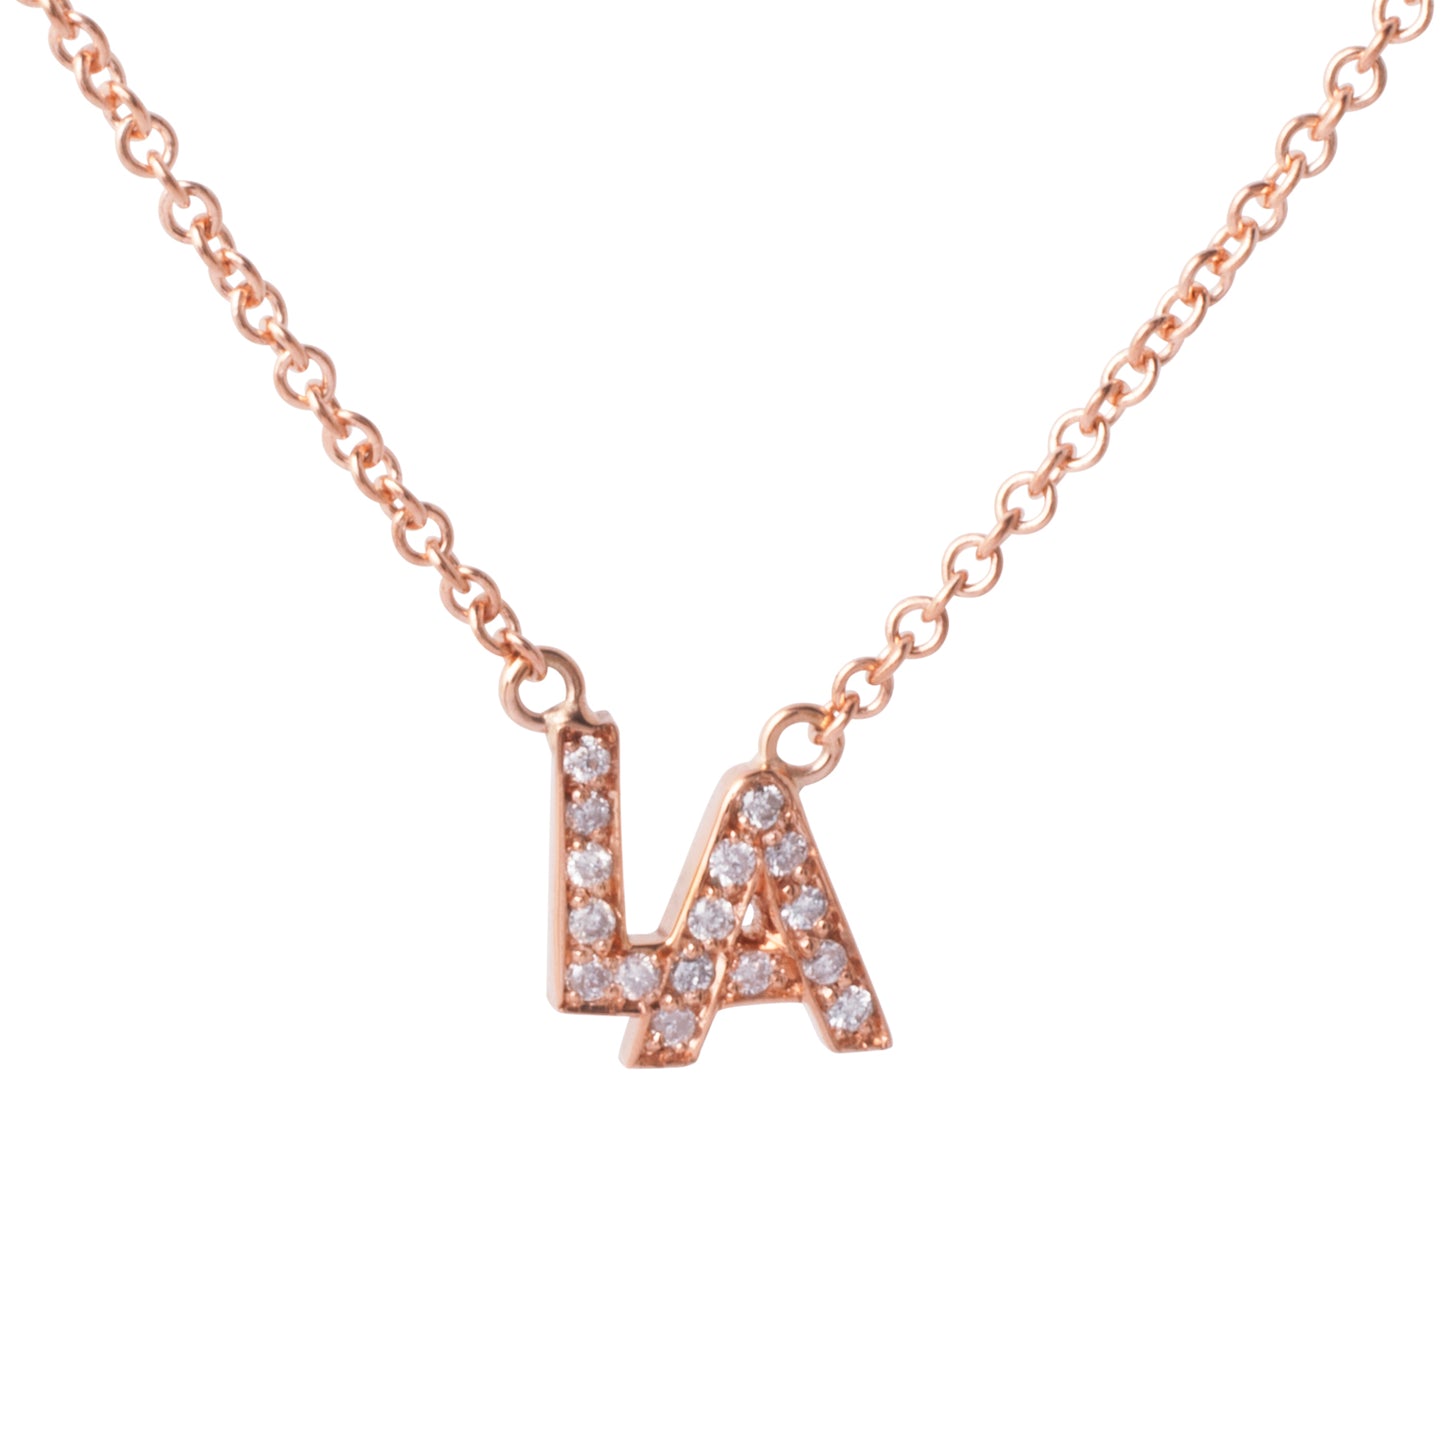 "CITY OF ANGELS" necklace